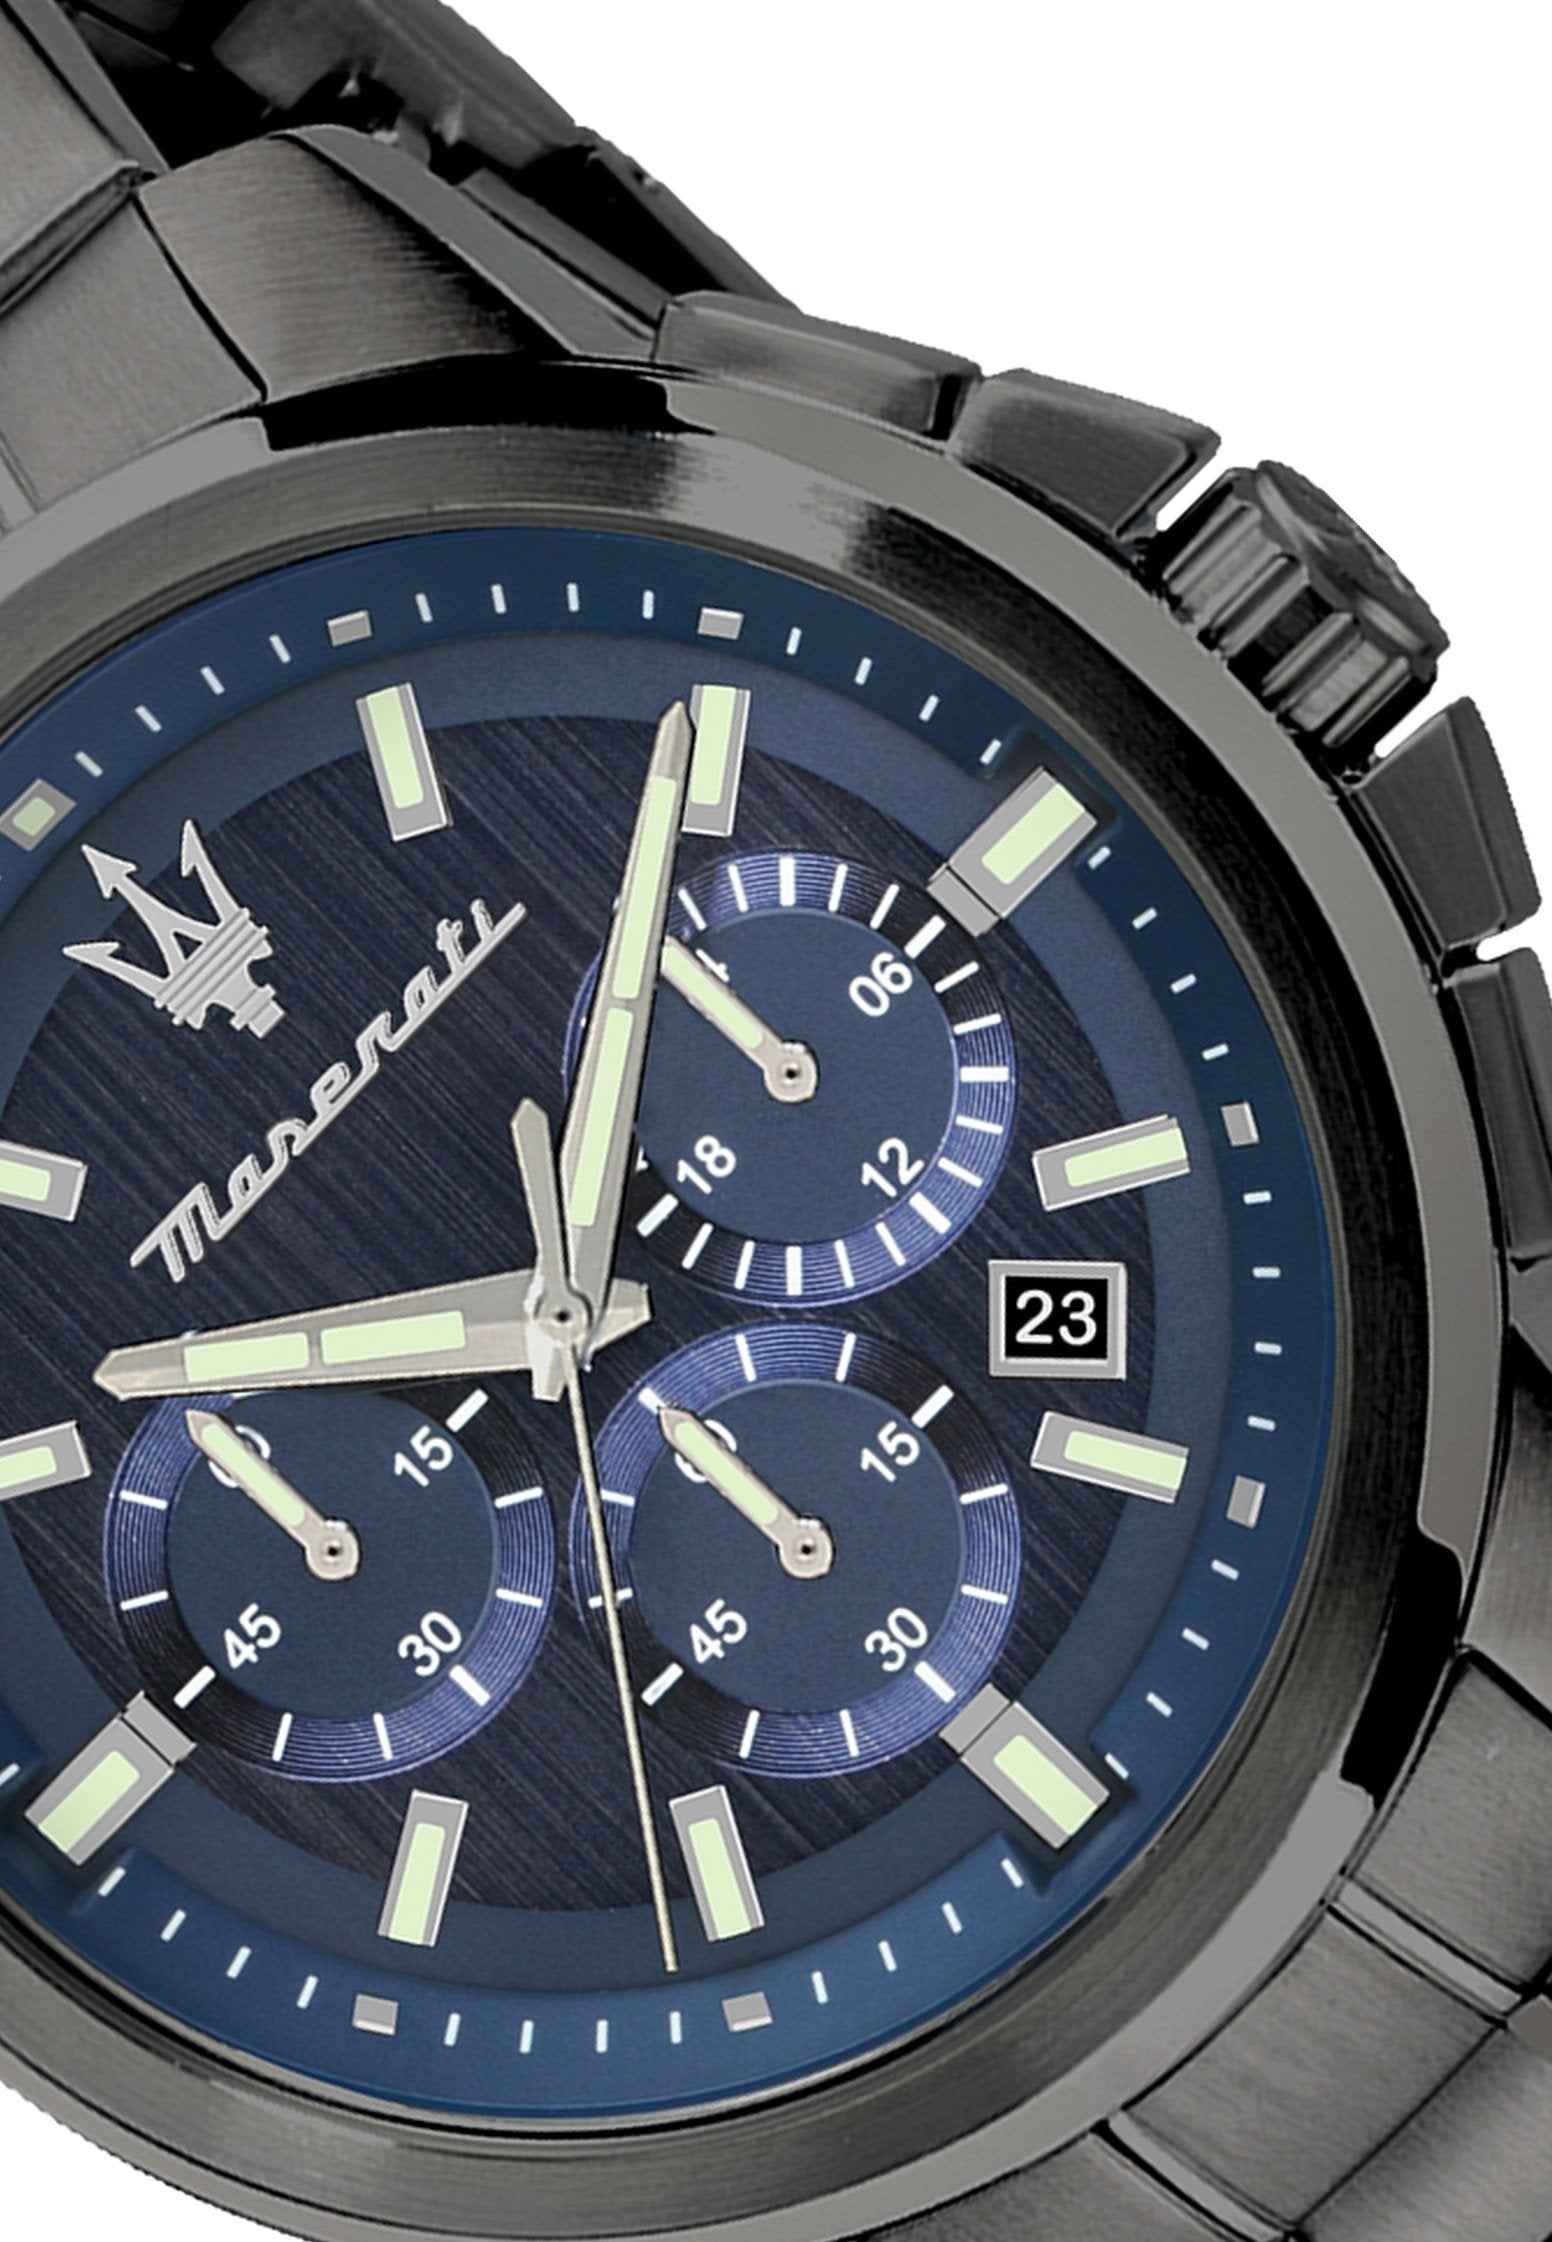 Maserati Successo 44mm Chronograph Blue Dial Stainless Steel Watch For Men - R8873621005